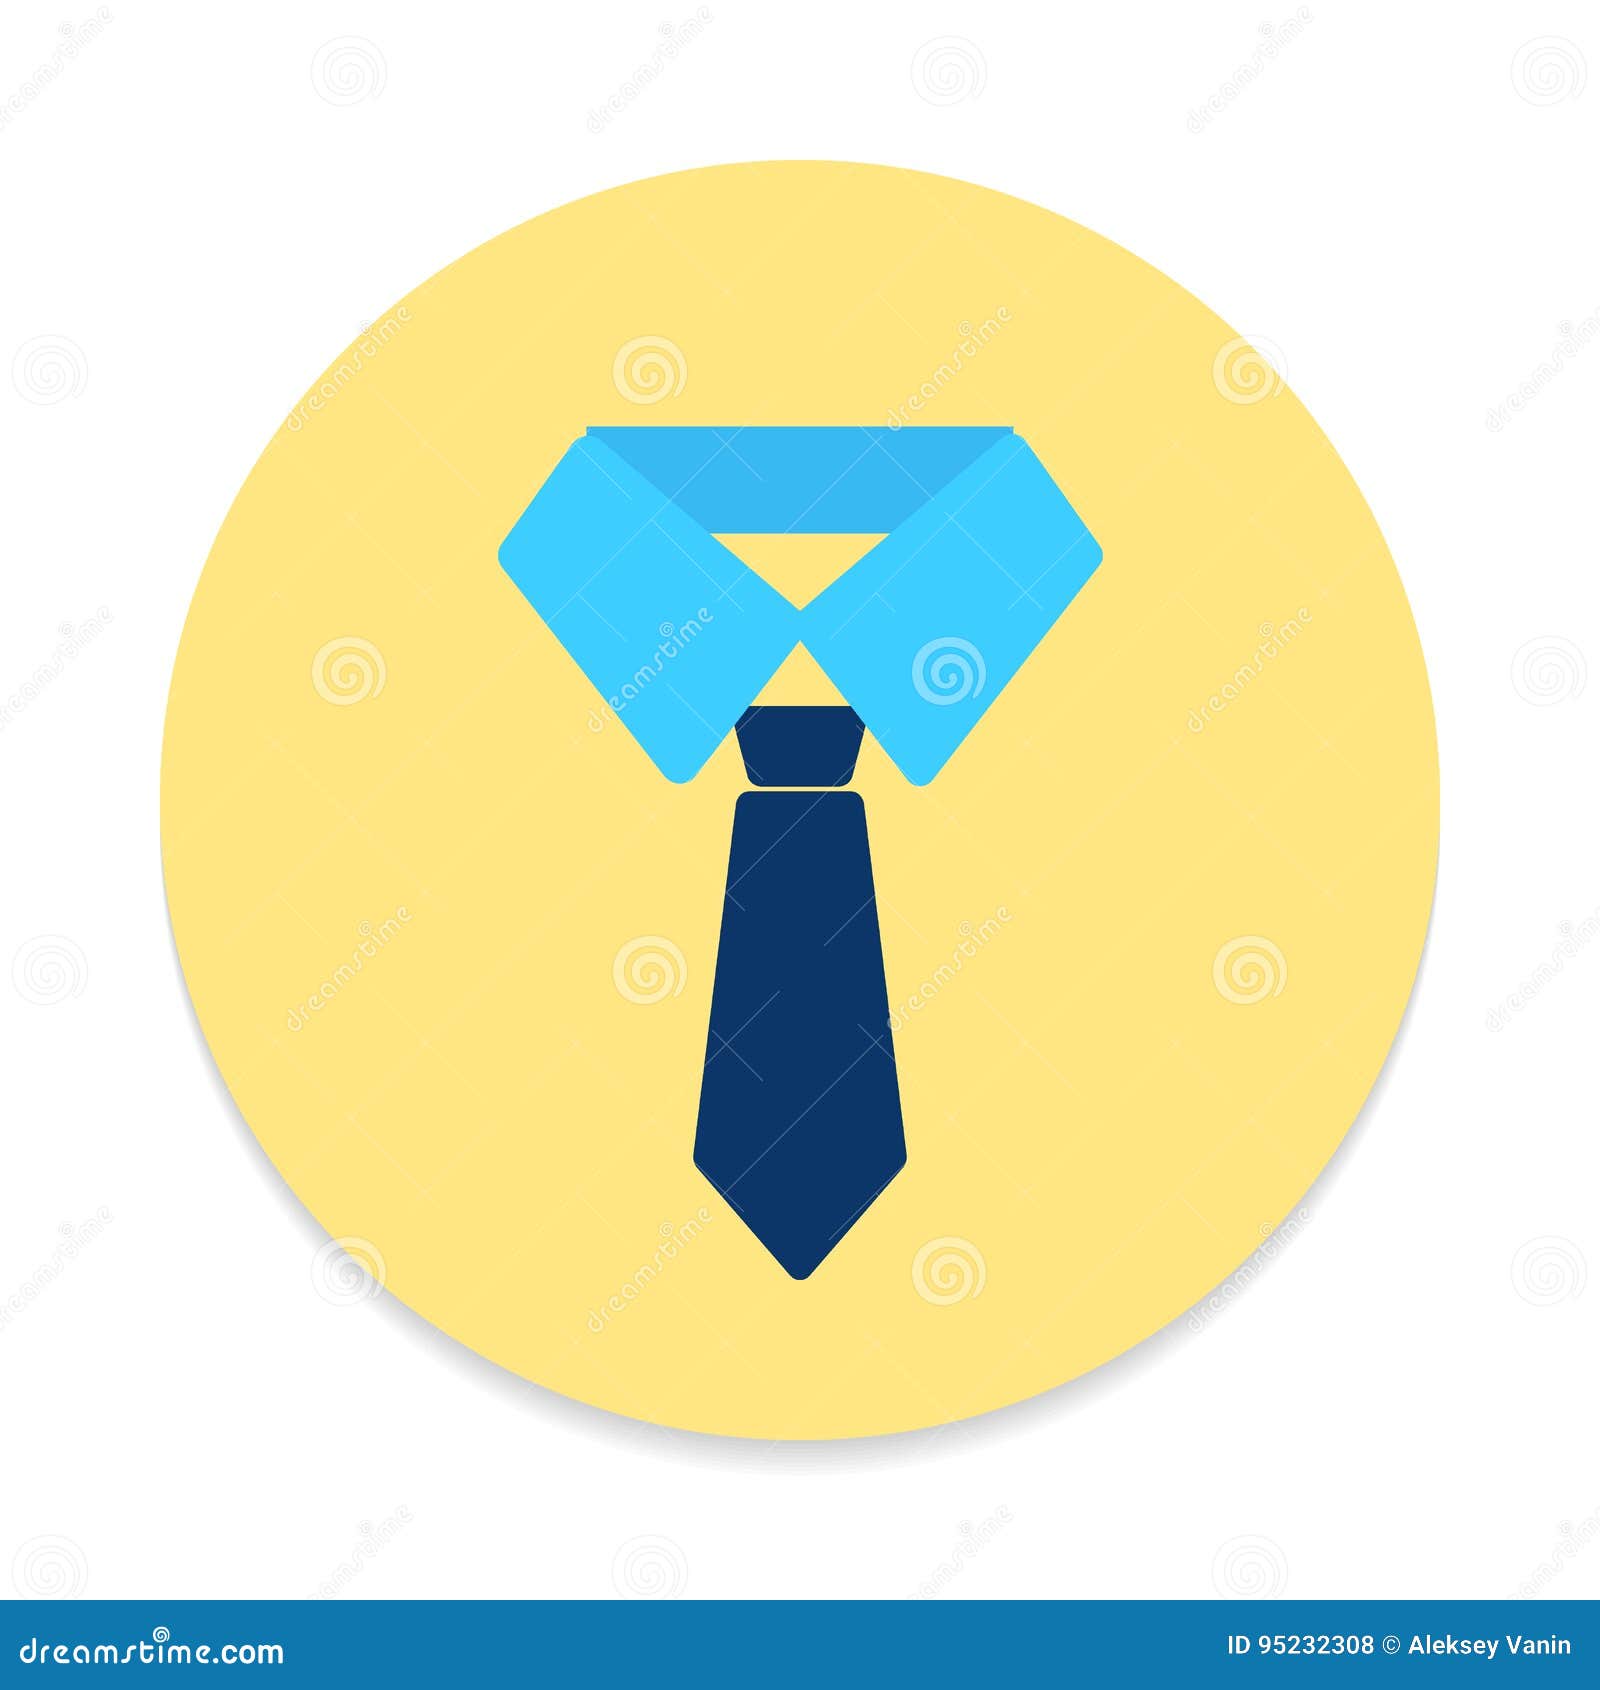 Tie Flat Icon. Round Colorful Button, Dress Code Circular Vector Sign ...